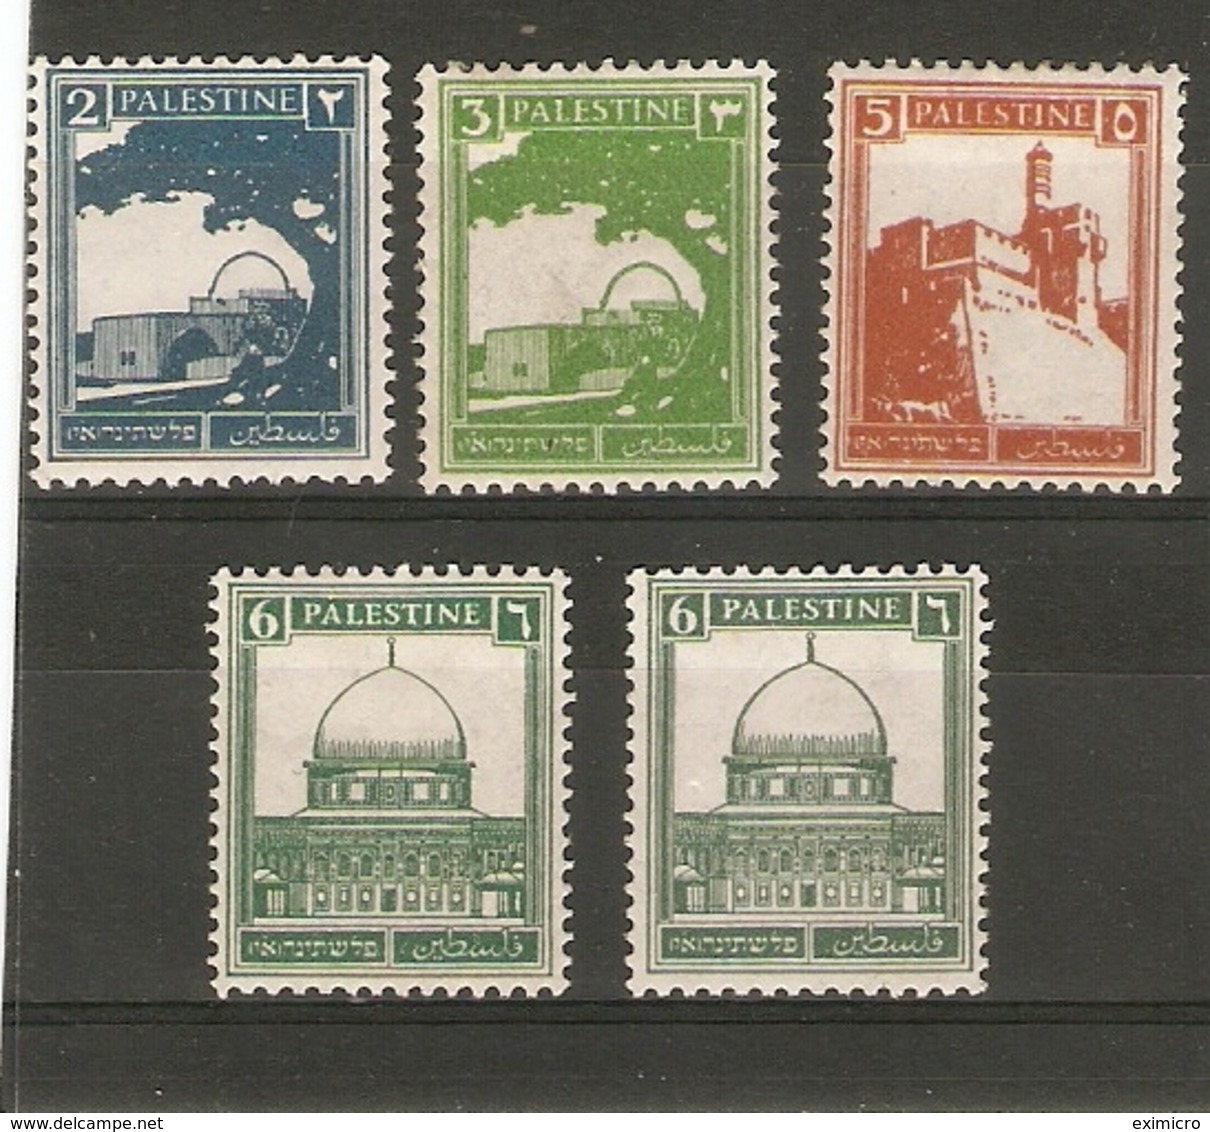 PALESTINE 1927 VALUES TO 6m PALE GREEN AND 6m DEEP GREEN BETWEEN SG 90 AND SG 94a MOUNTED MINT Cat £16.25 - Palestine